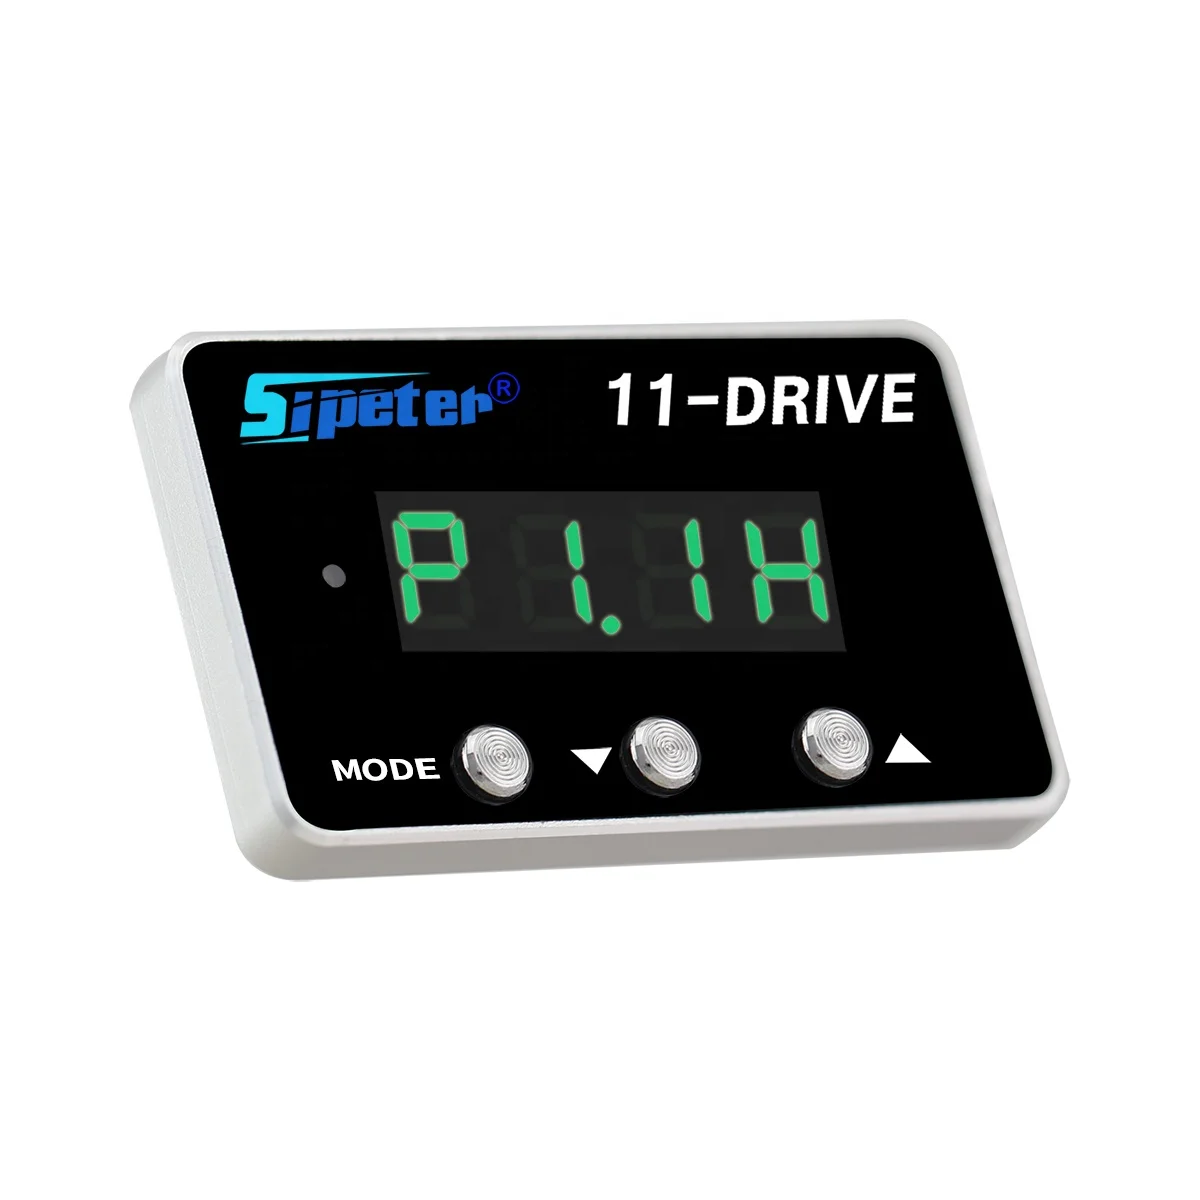 Automotive Electronic Throttle Accelerator Booster Controller Sipeter 11 Drive Factory Supply for Japan Vehicles Factory Supply